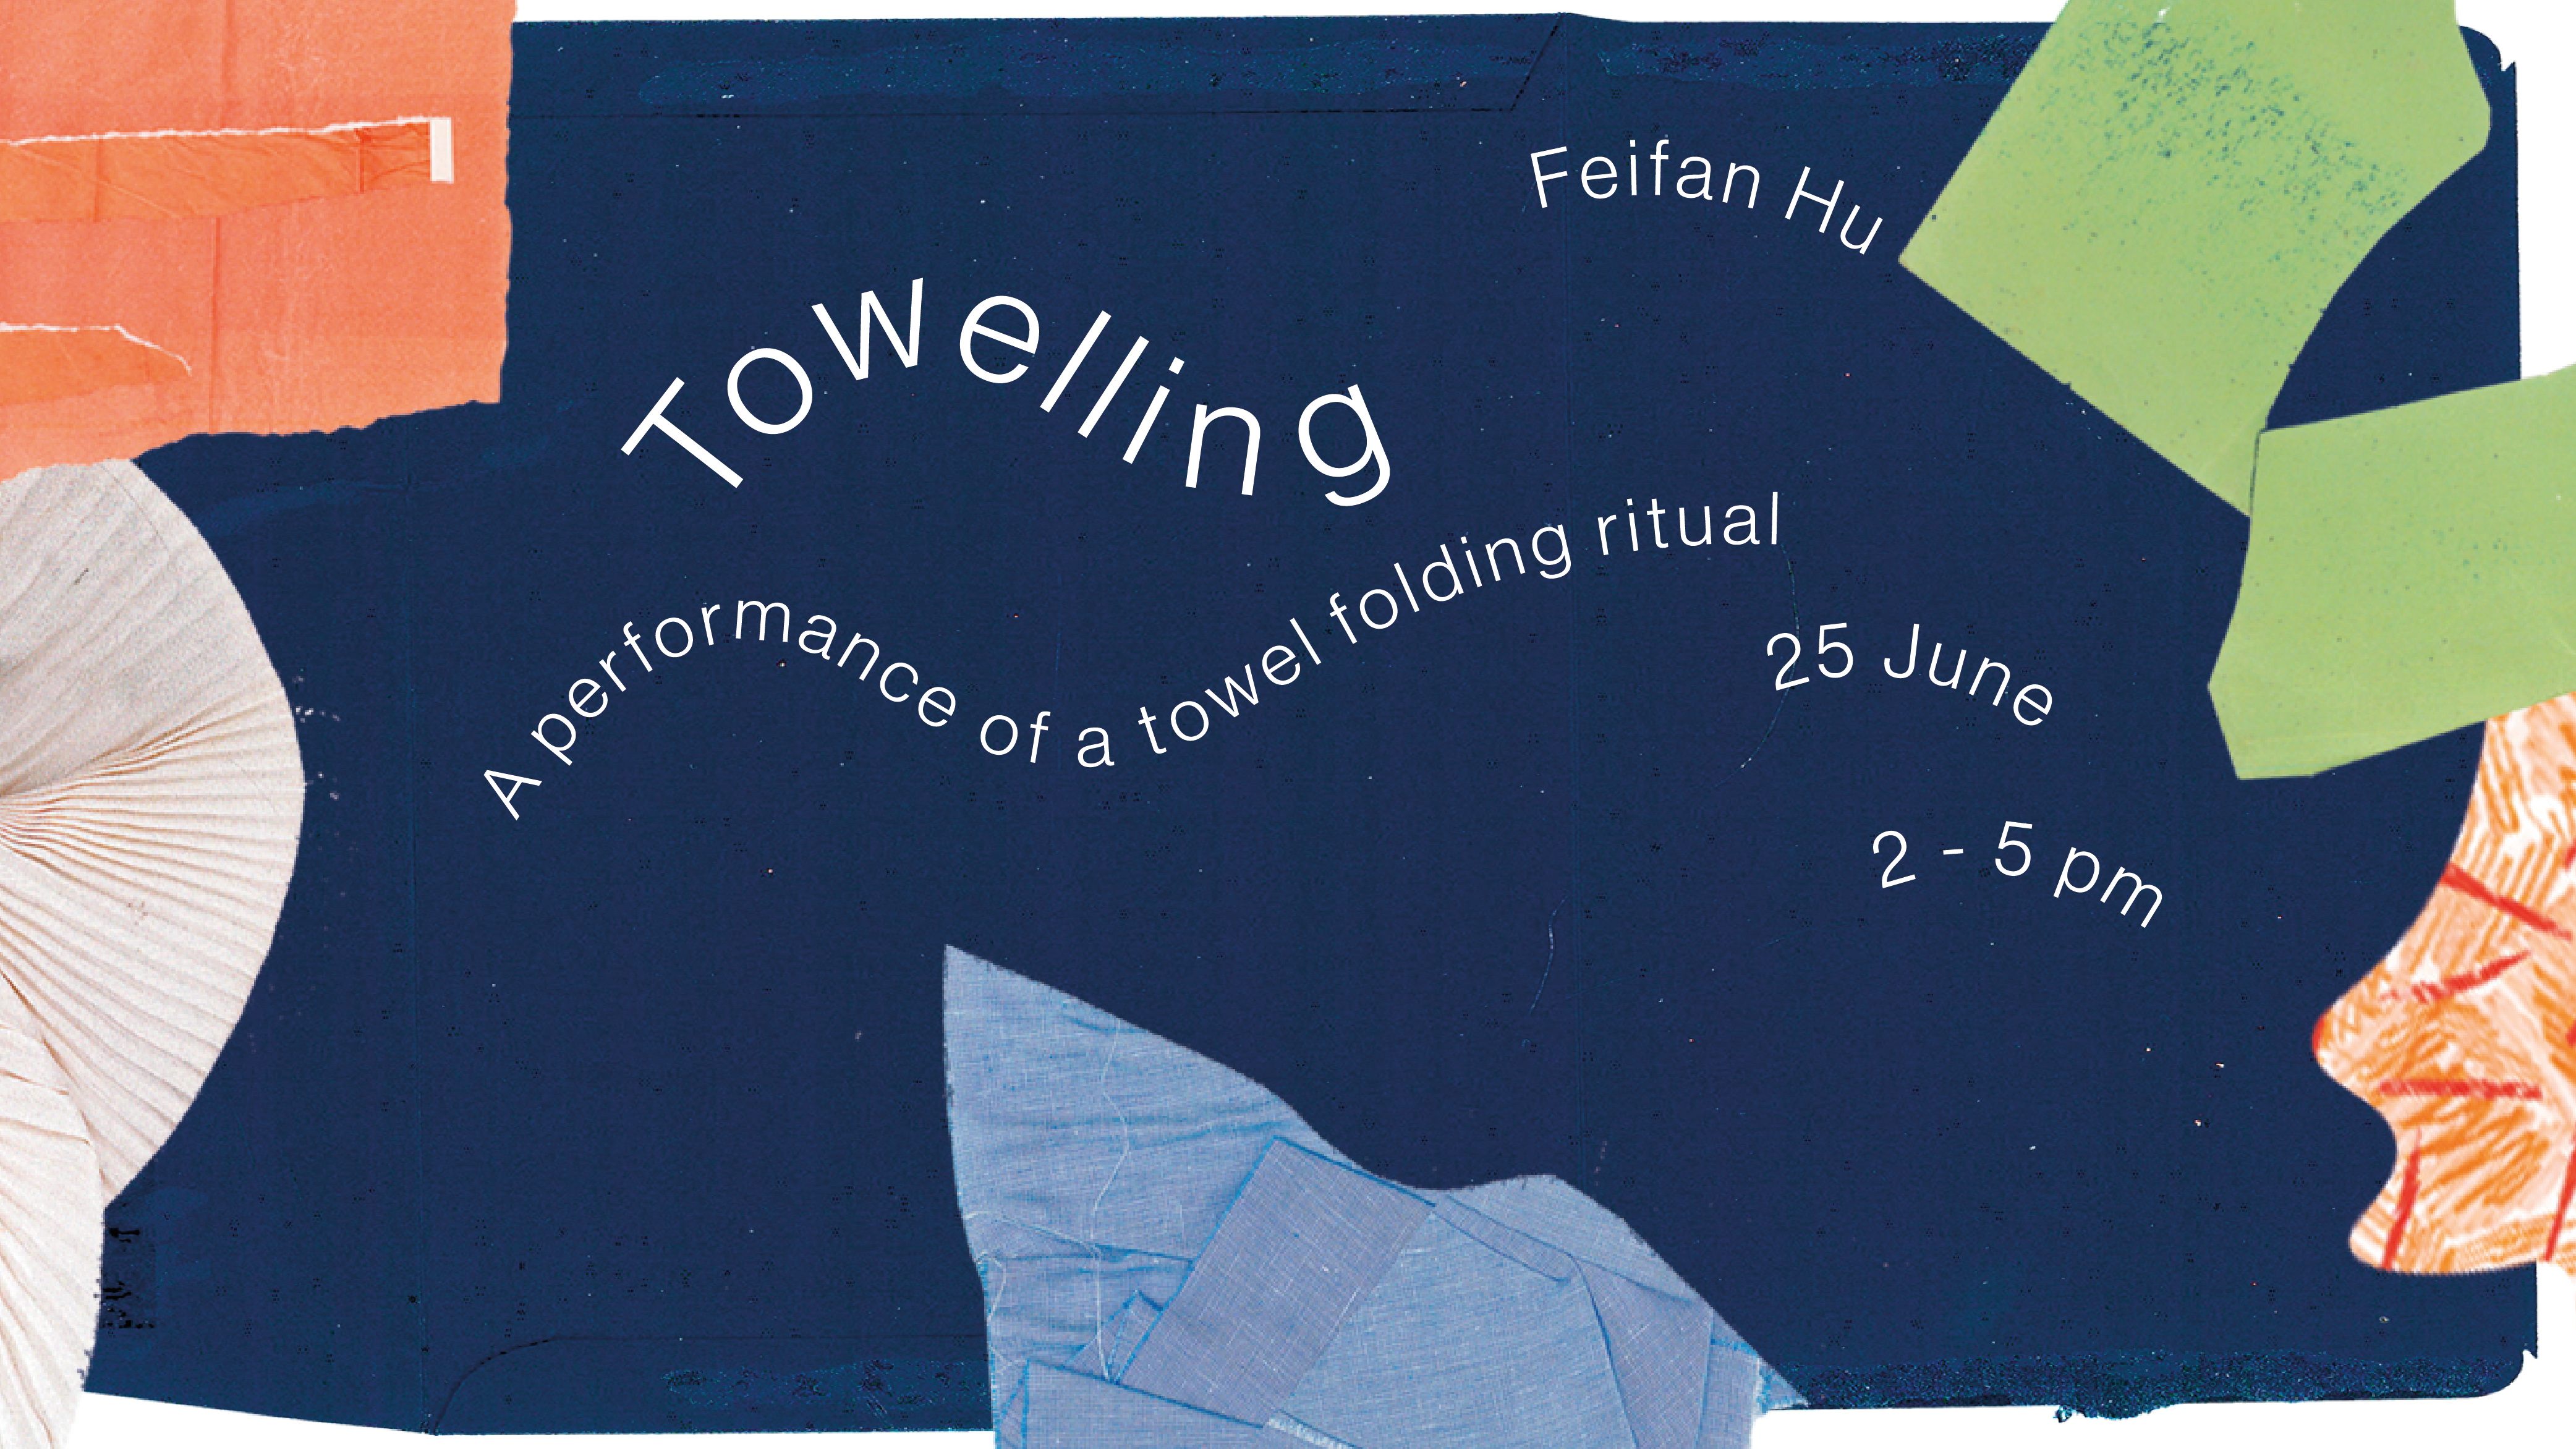 A graphic of fabrics scraps, bordering a navy blue fabric background with wavy lines of text reading ‘Towelling. Feifan Hu. A performance of a towel folding ritual, 25th of June, 2 to 5pm’